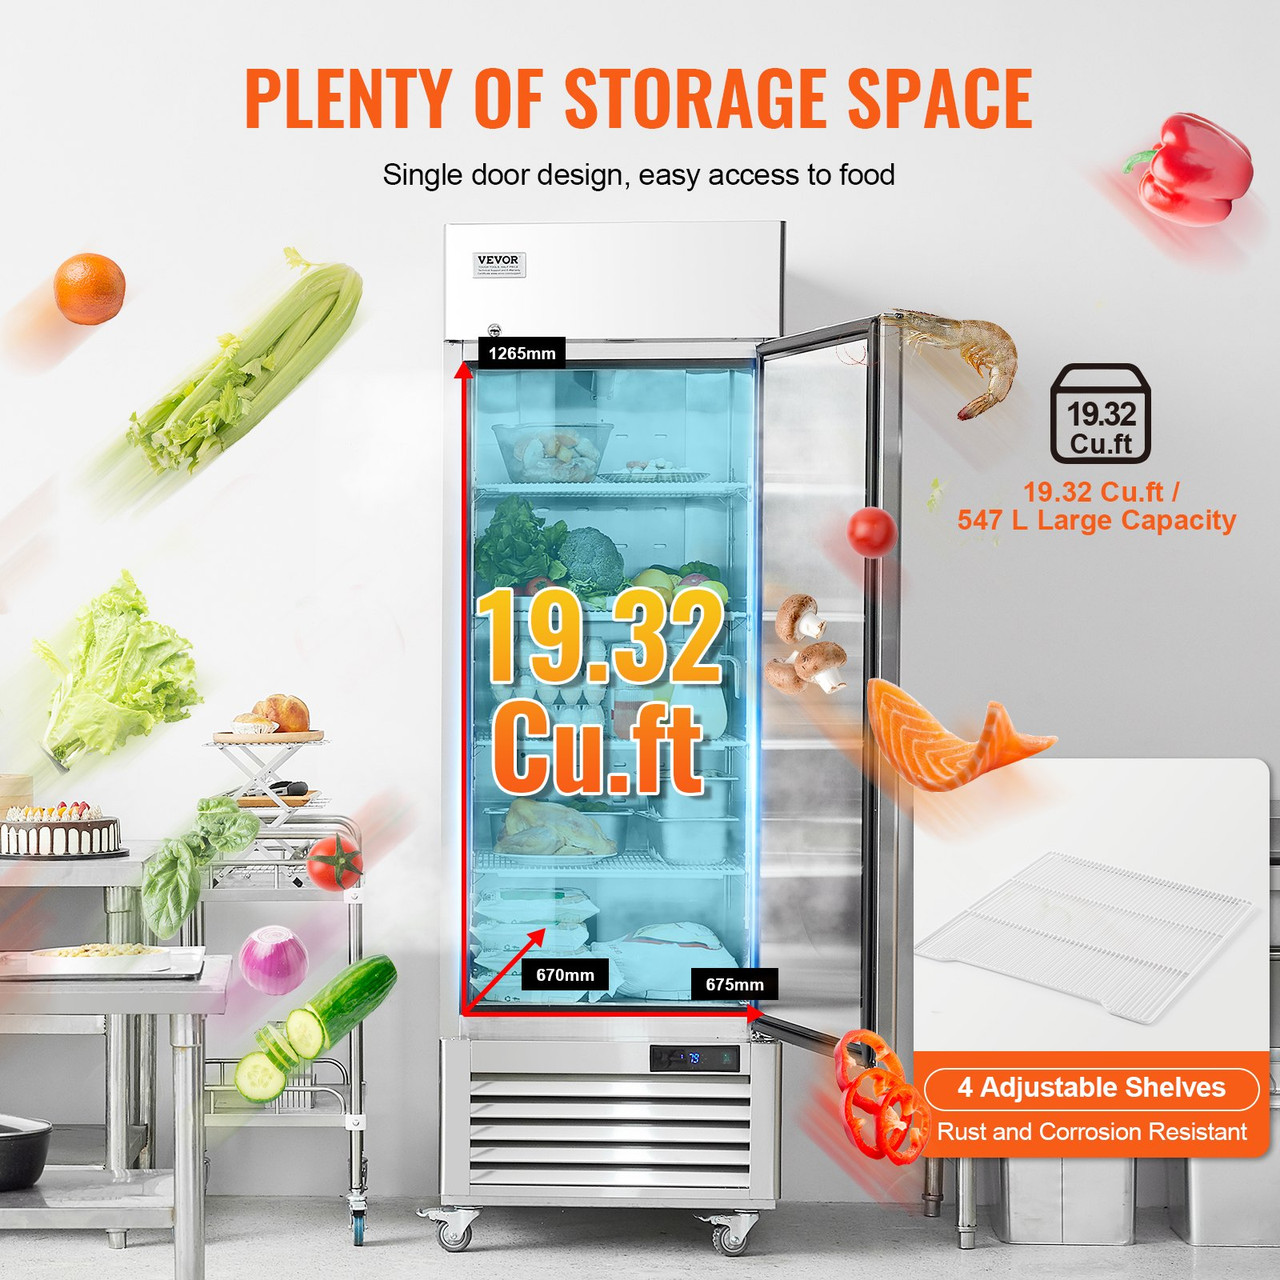 VEVOR Commercial Refrigerator 19.32 Cu.ft, Reach In 27" W Upright Refrigerator Single Door, Auto-Defrost Stainless Steel Reach-in Refrigerator & 4 Shelves, 33 to 41? Temp Control, LED Light, 4 Wheel